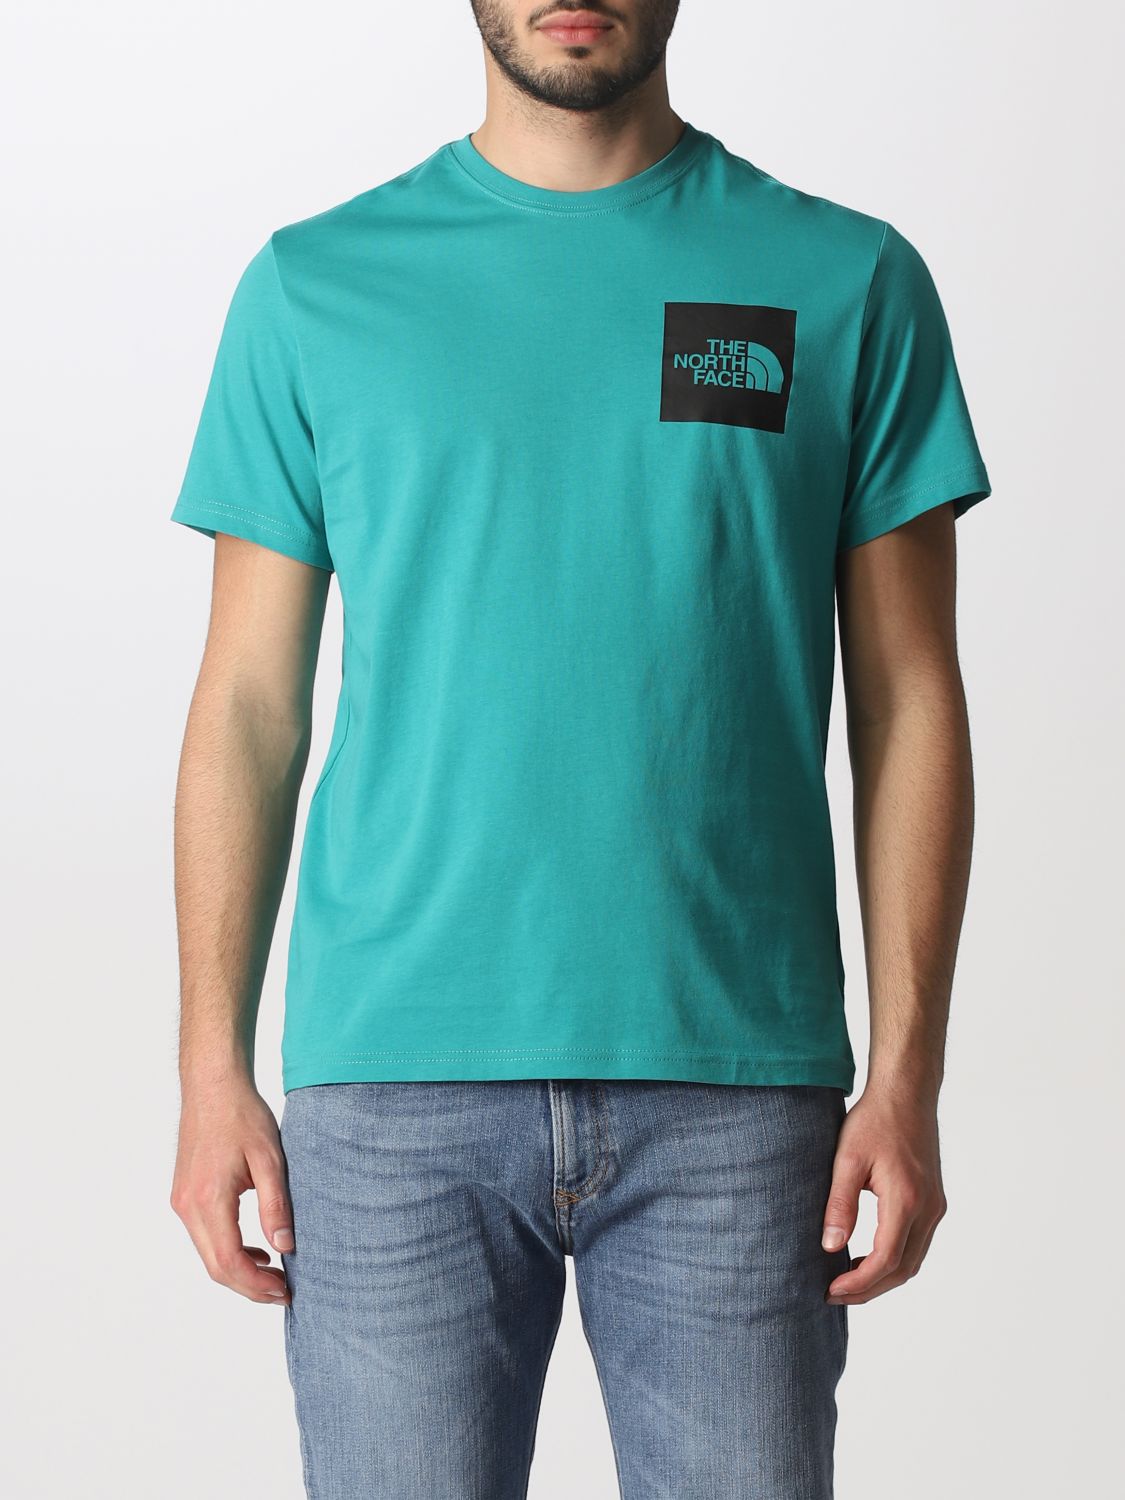 the-north-face-cotton-t-shirt-with-logo-green-the-north-face-t